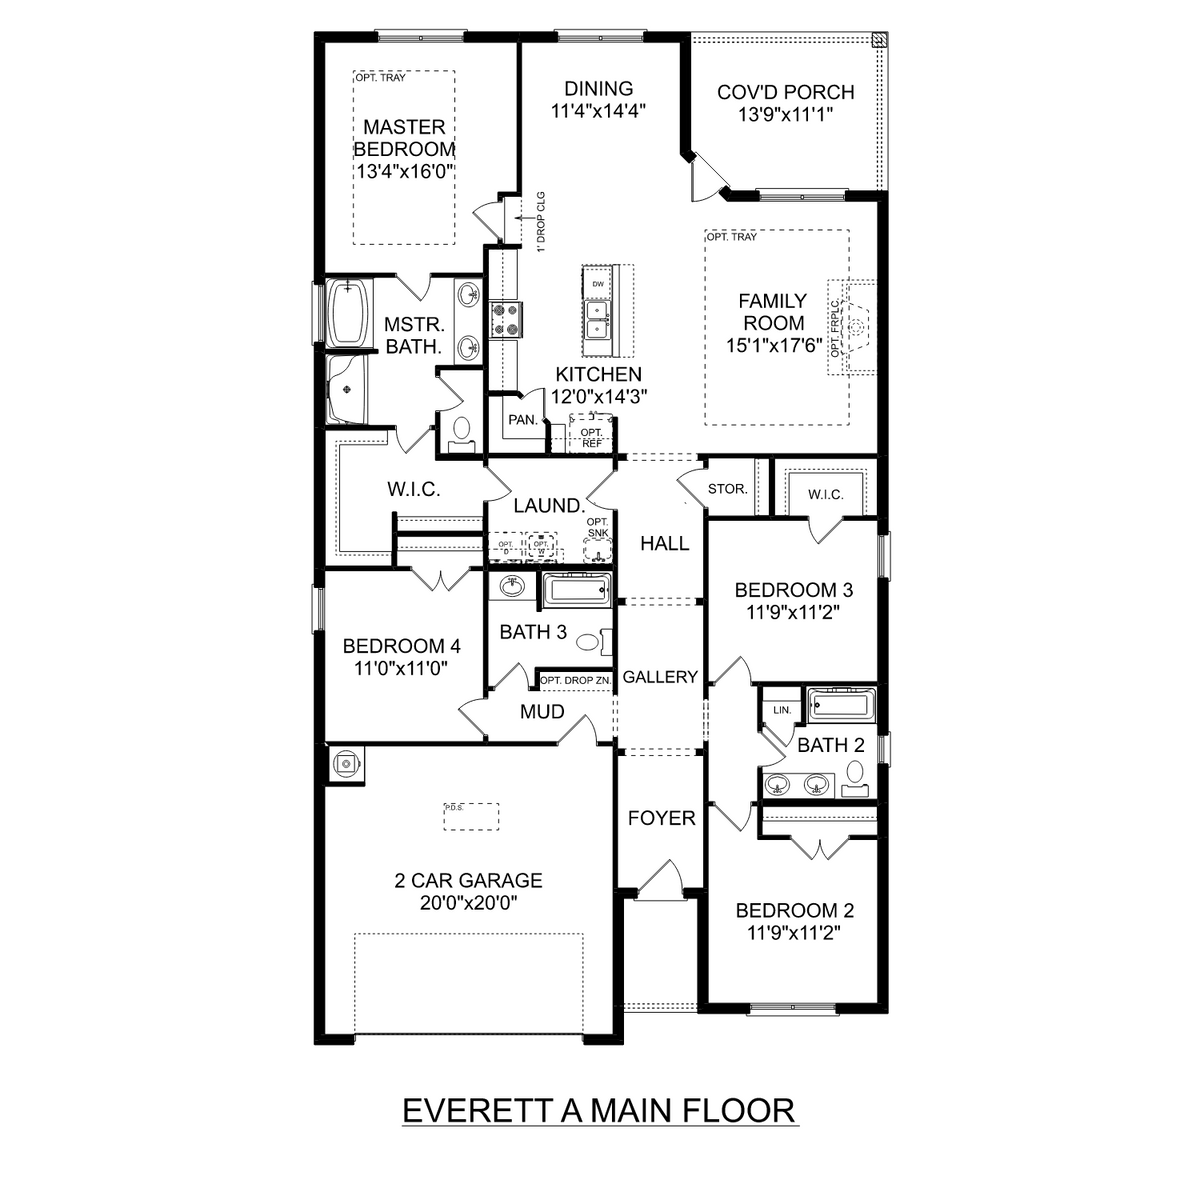 1 - The Everett buildable floor plan layout in Davidson Homes' Hollon Meadow community.